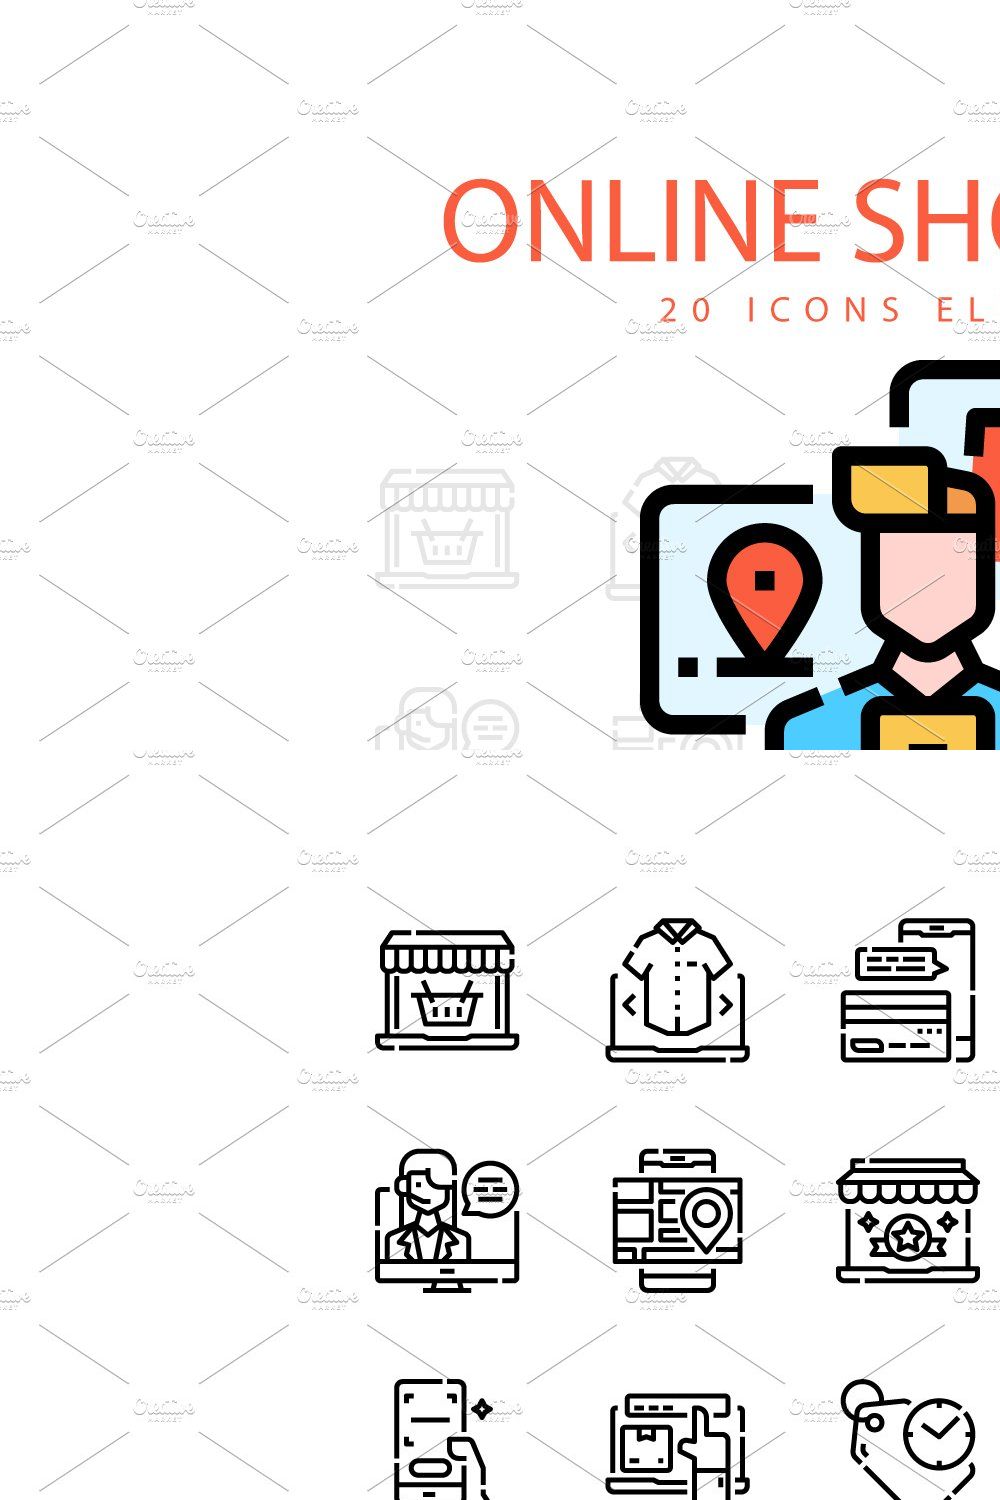 ONLINE SHOPPING ICONS PACKS pinterest preview image.